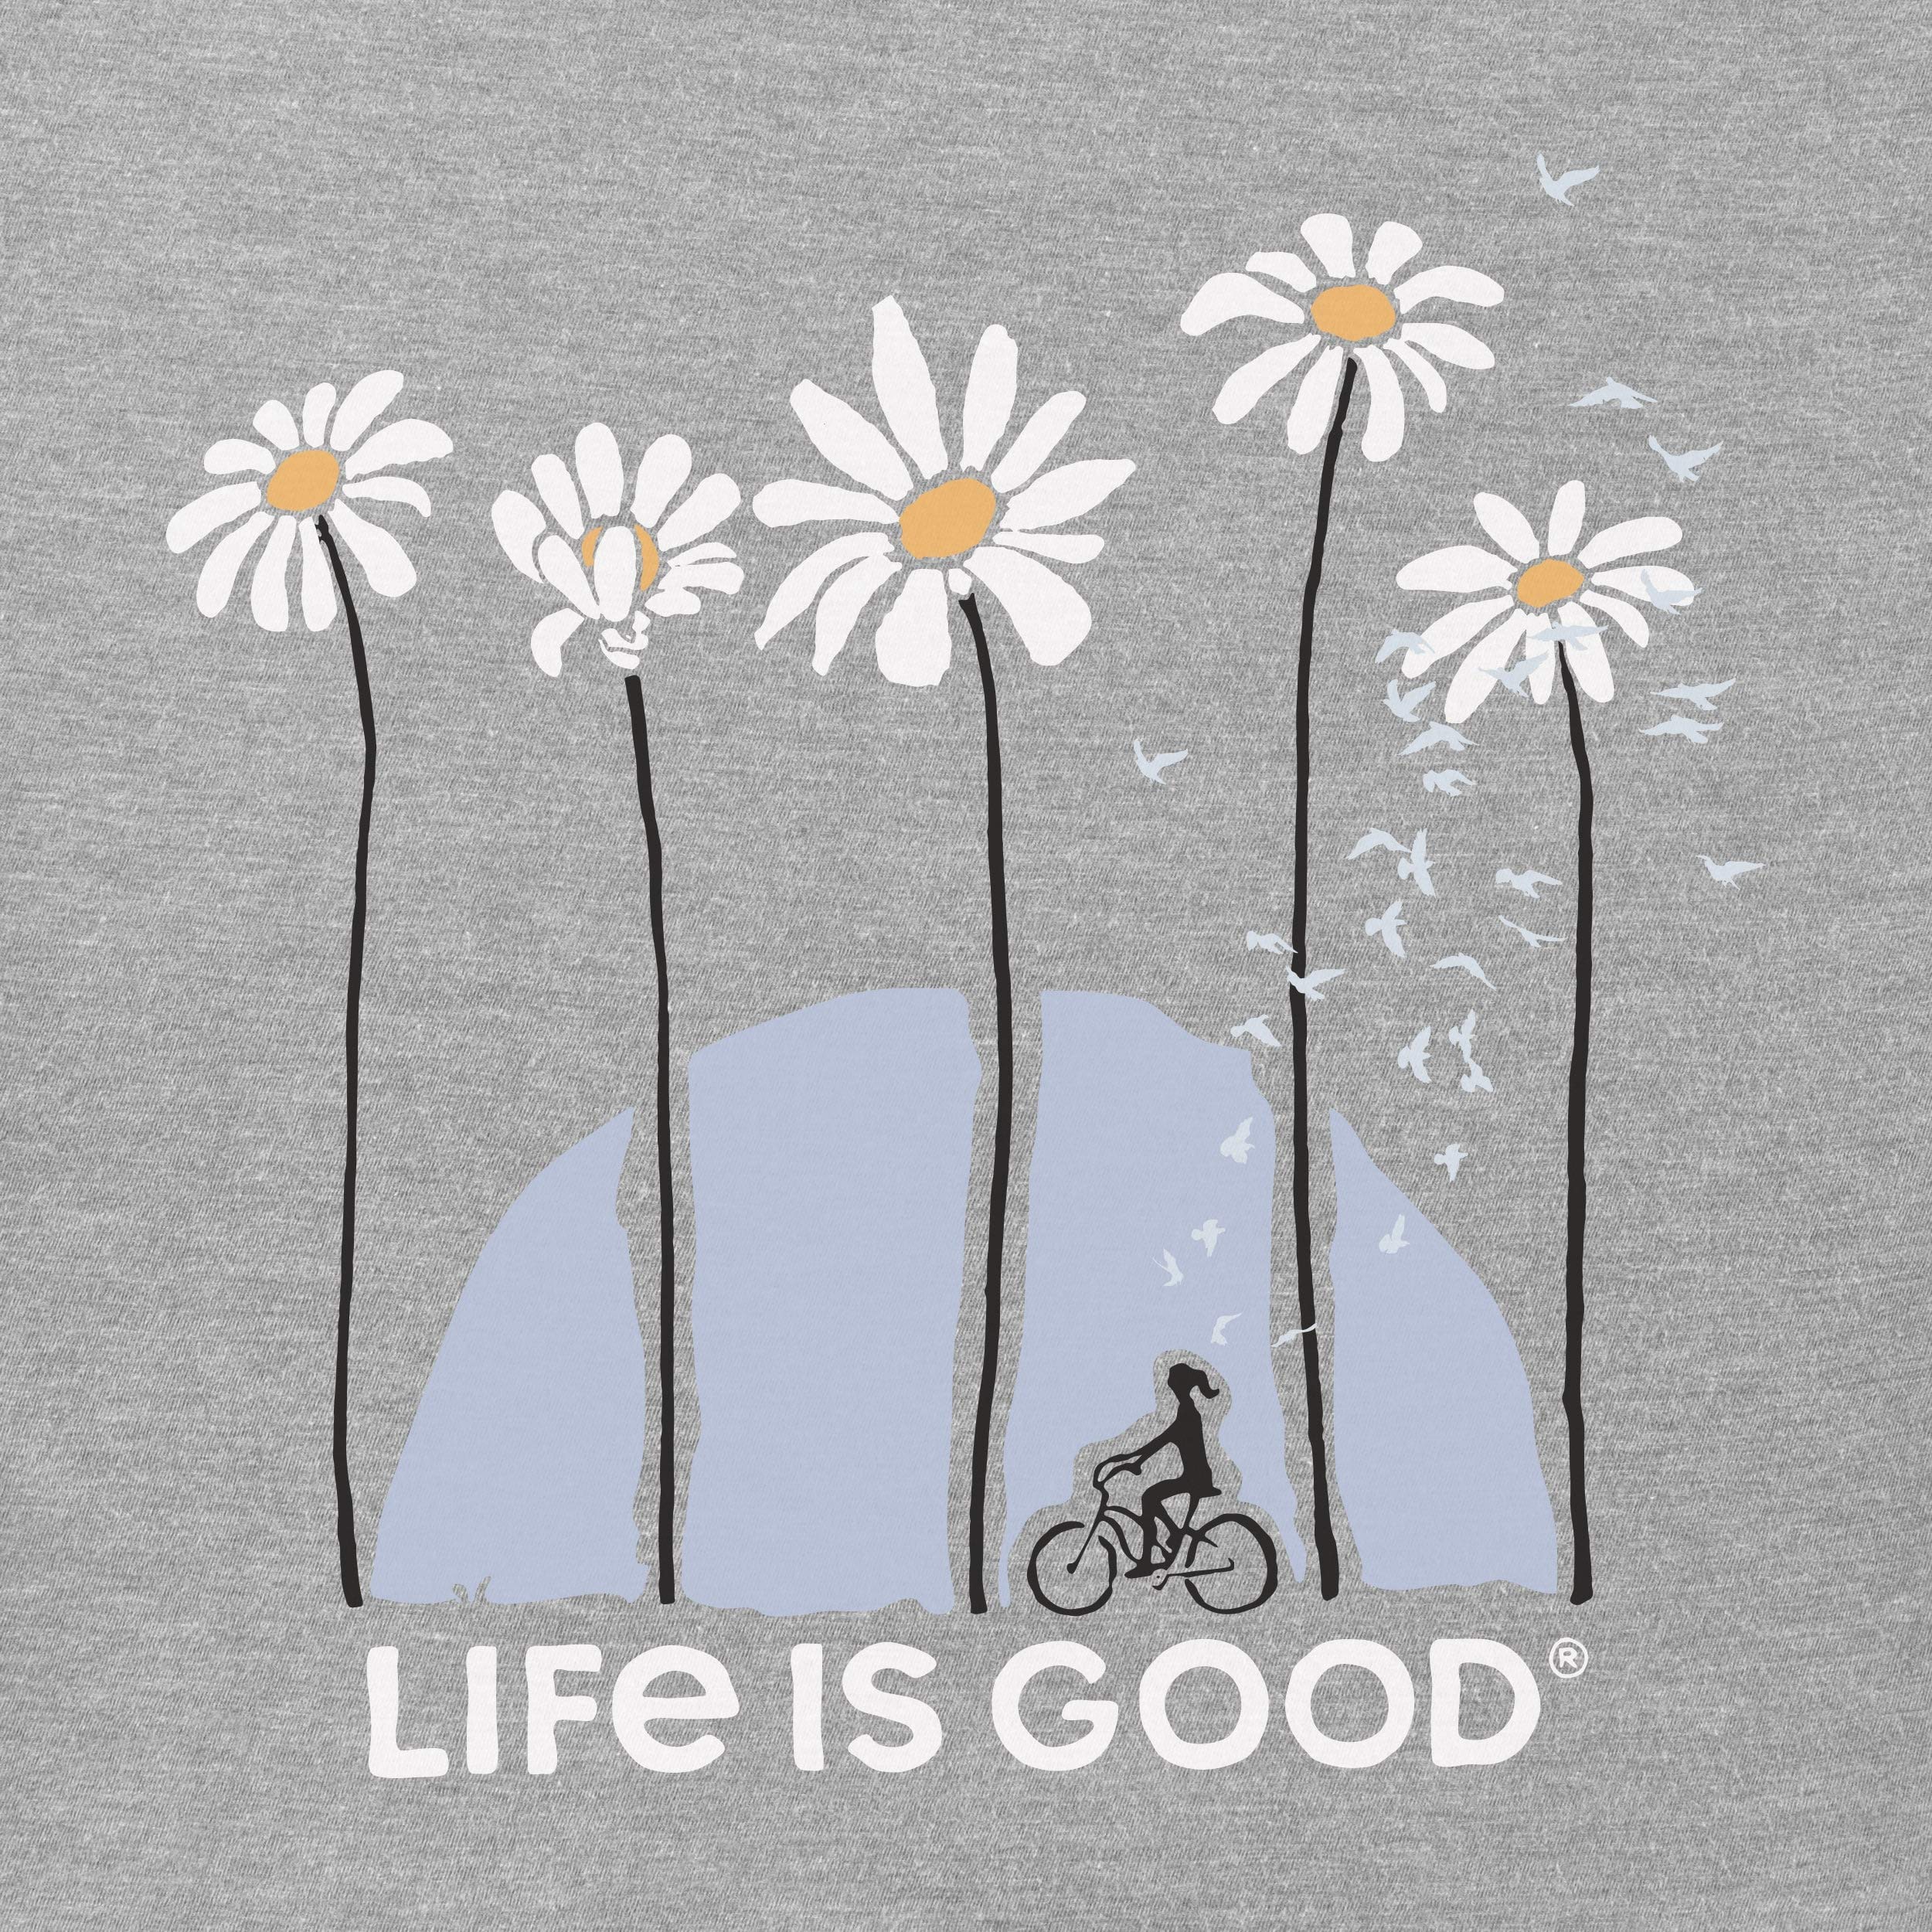 Life is Good Women's Bicycle Riding in Flowers Cotton Tee Short Sleeve Graphic V-Neck T-Shirt, Towering Daisies Bike